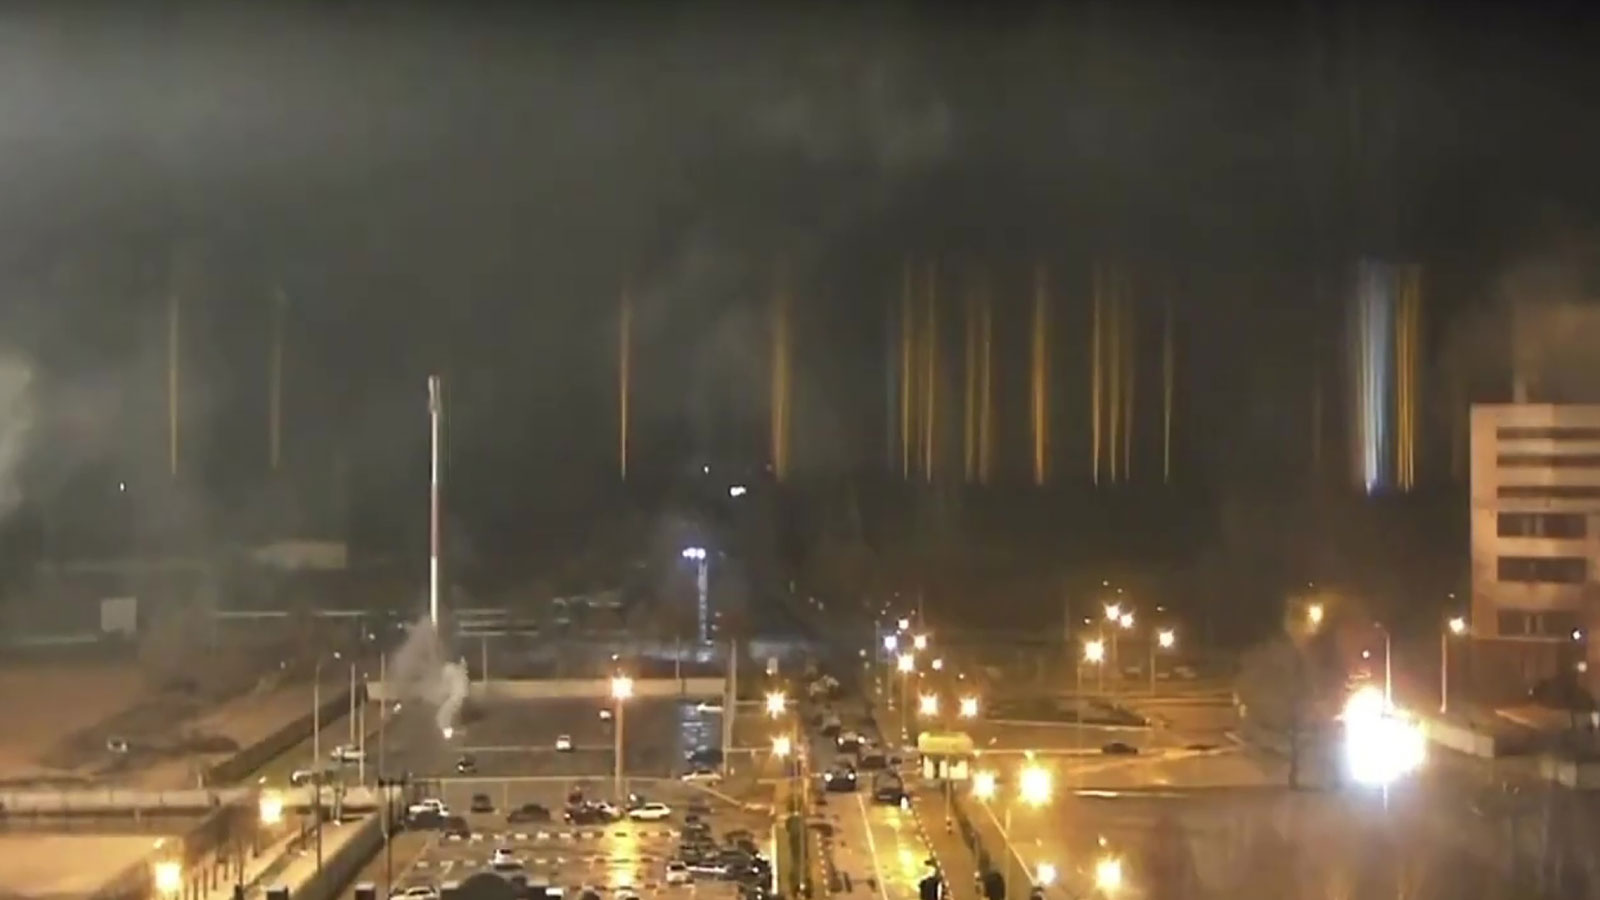 A screen grab captured from video shows a view of Zaporizhzhia nuclear power plant following clashes at the stie on March 4.